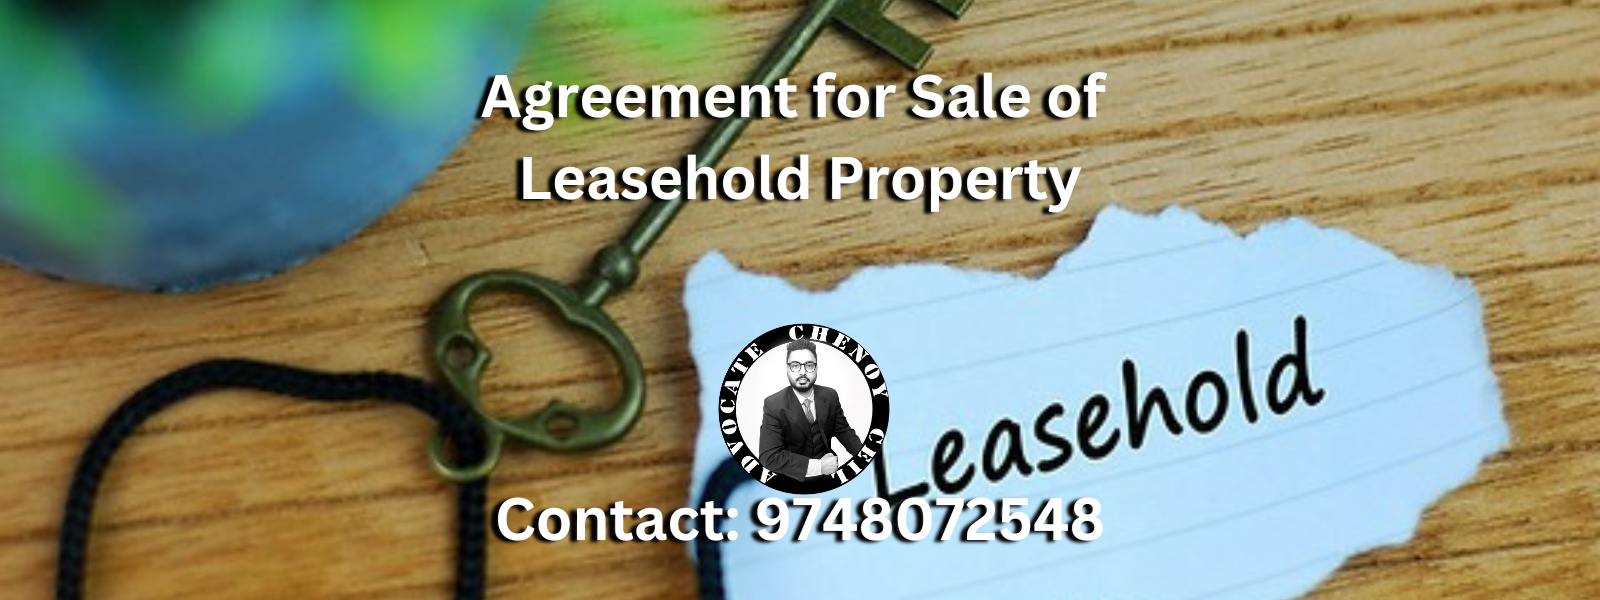 Format Agreement Sale Leasehold Property